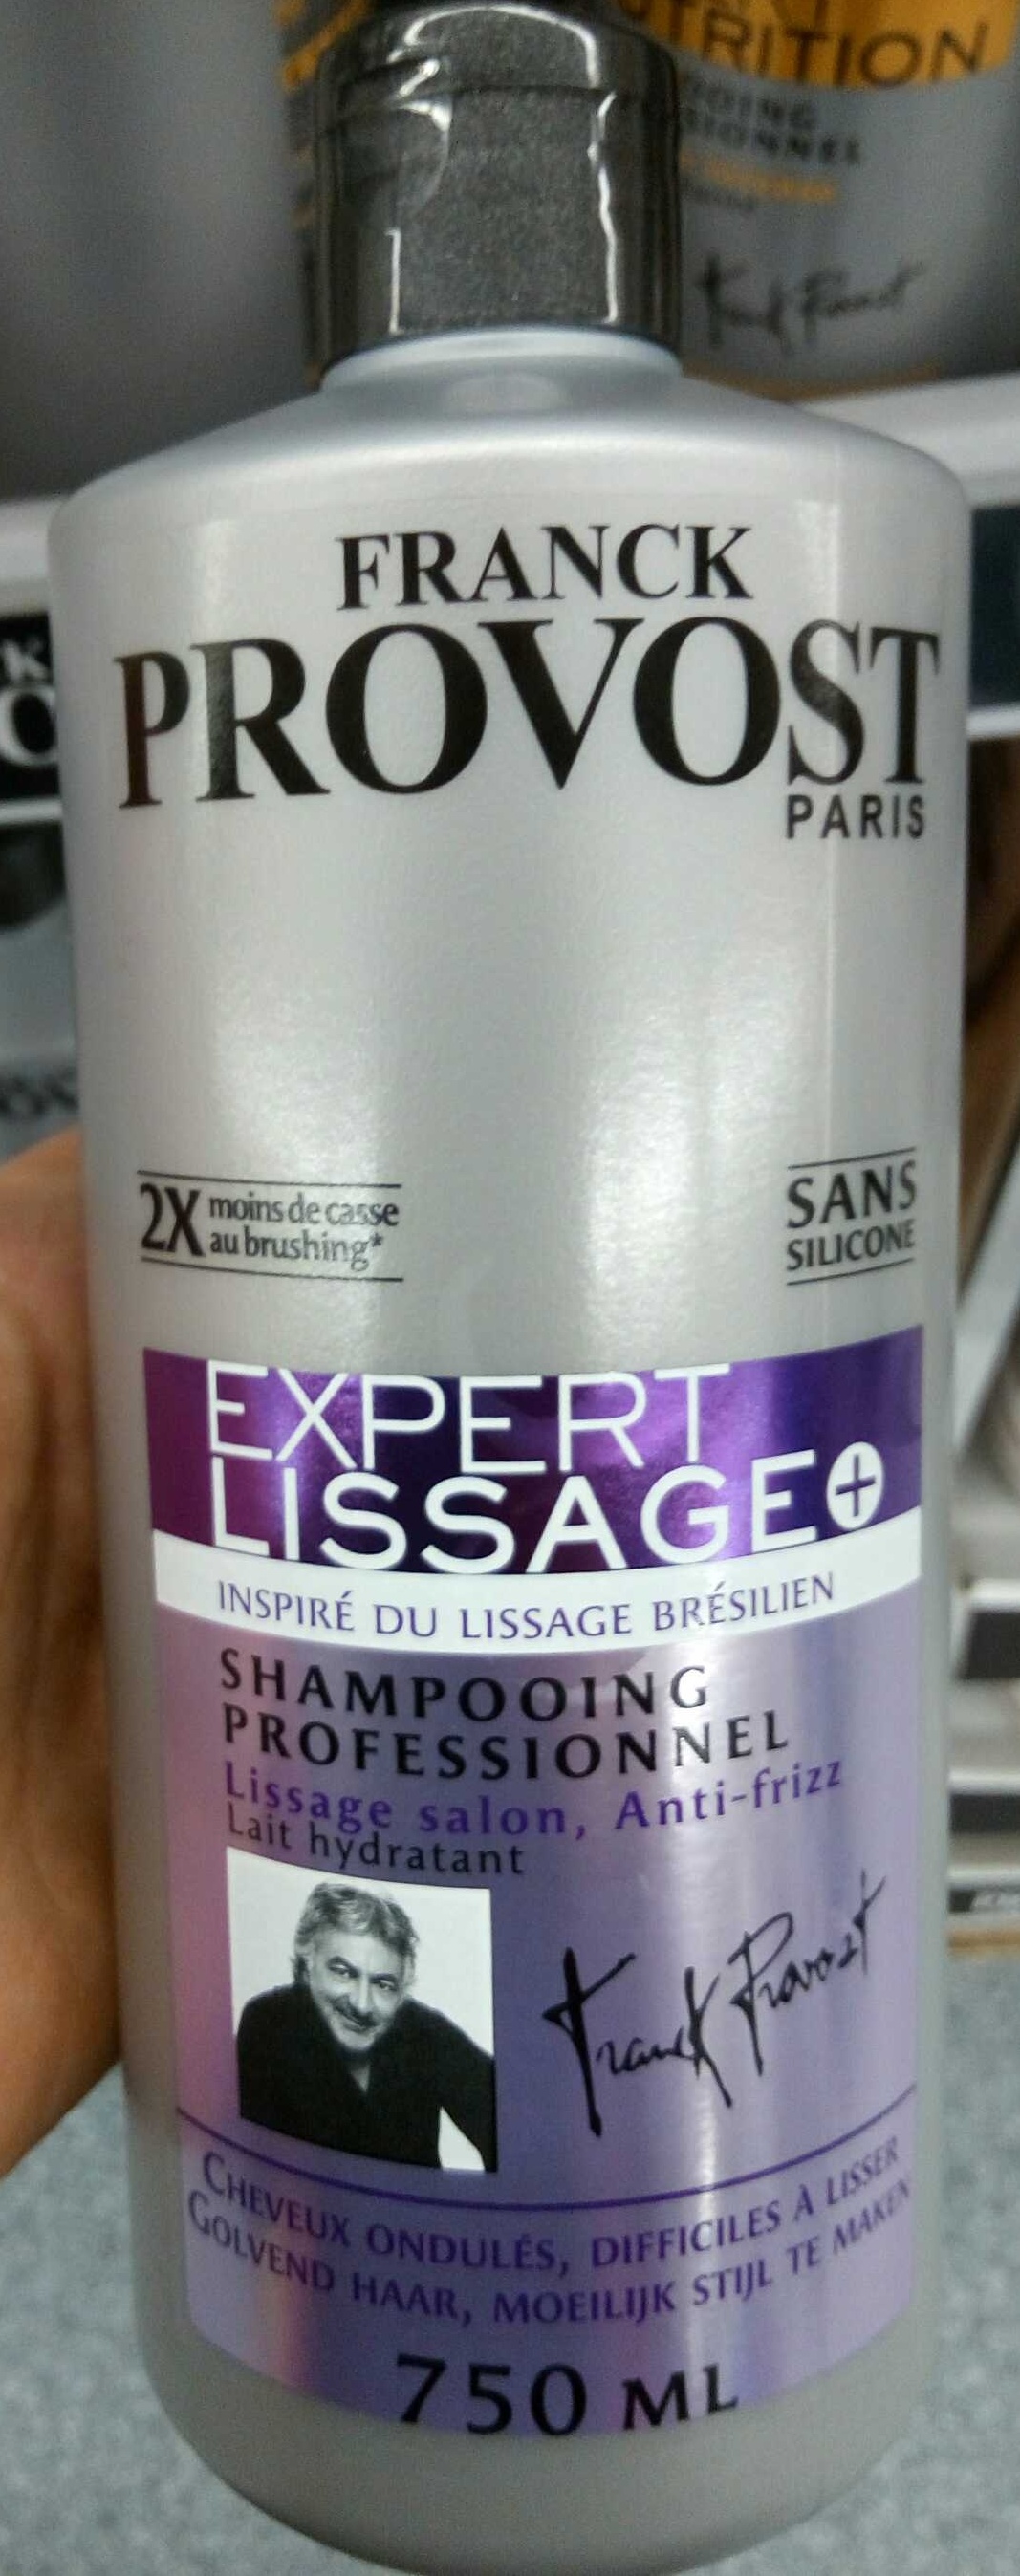 Expert lissage+ shampooing professionnel - Produkto - fr